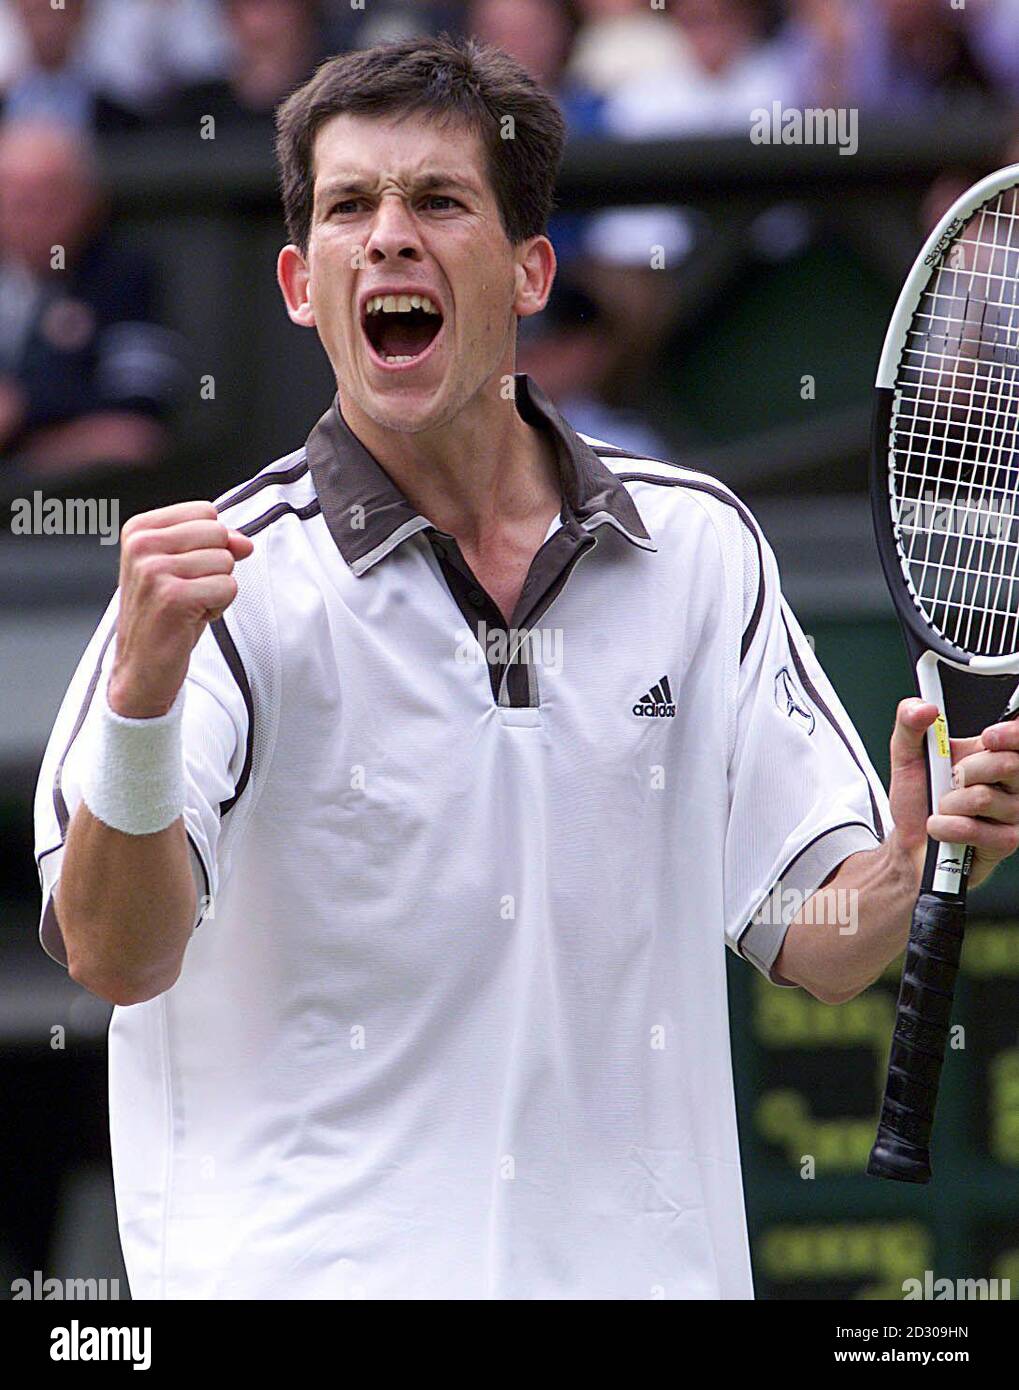 No Commercial Use: Tim Henman celebrates after defeating American Jim Courier  4-6  7-5  7-5  6-7  9-7  at the Wimbledon Tennis Championships.  Stock Photo